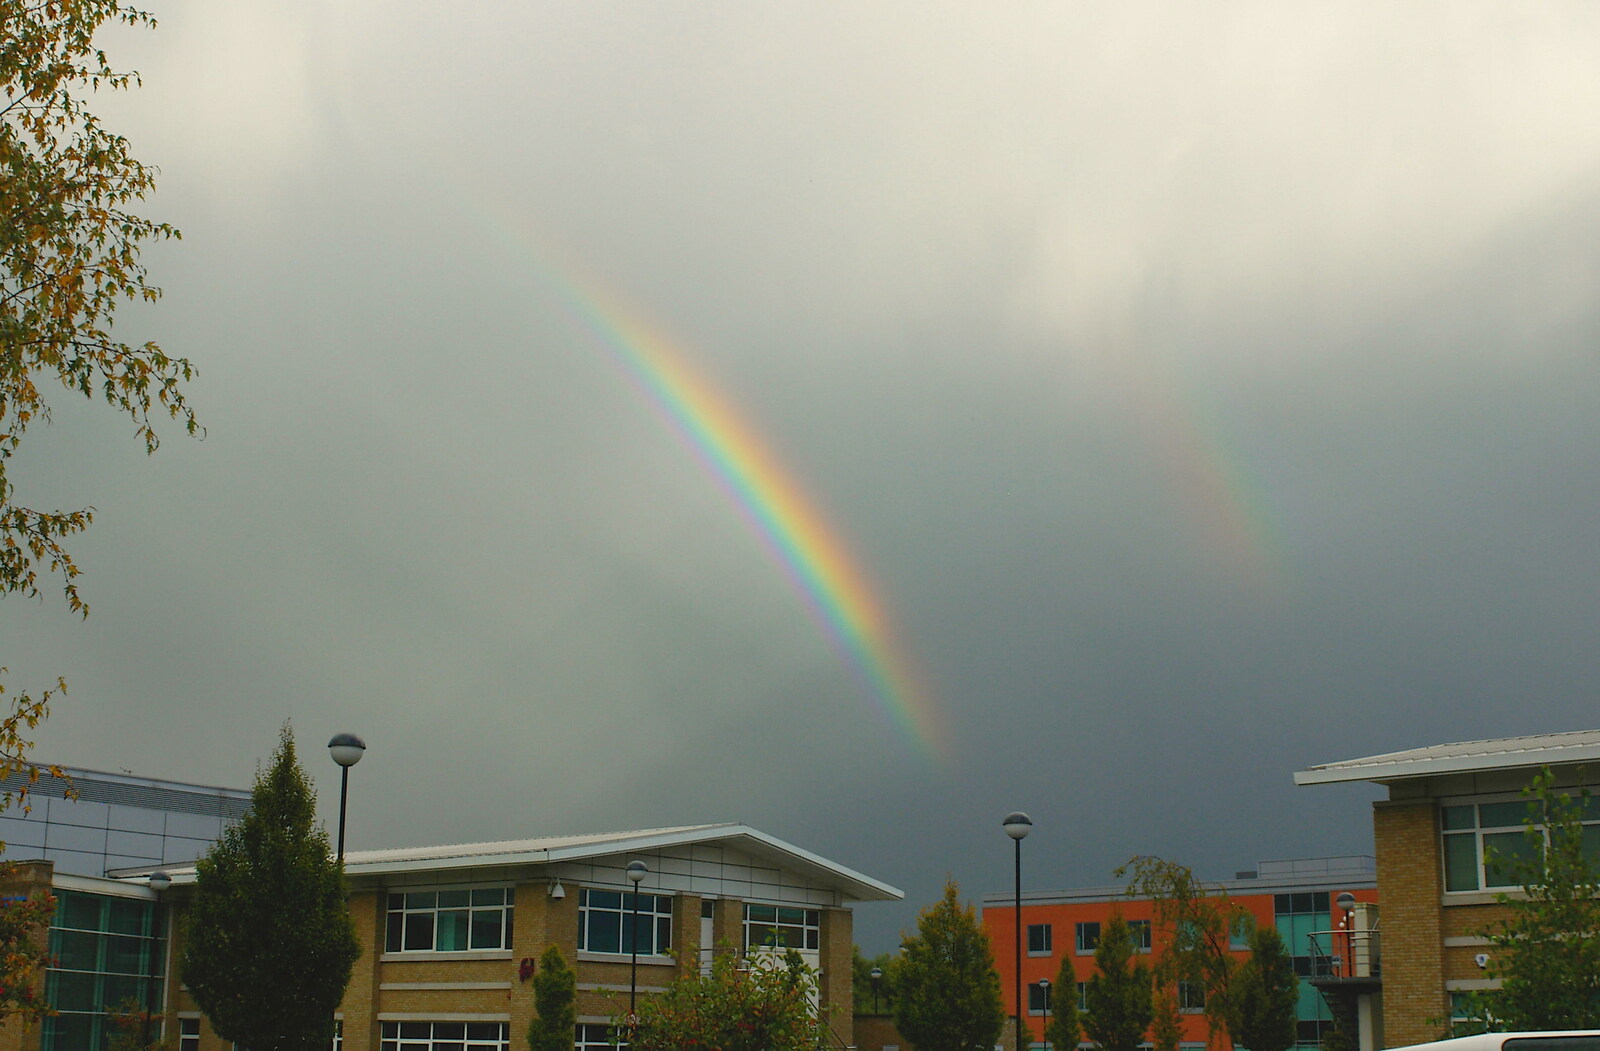 The double rainbow over the business park from Andrew Leaves Qualcomm, Cambridge - 18th October 2005